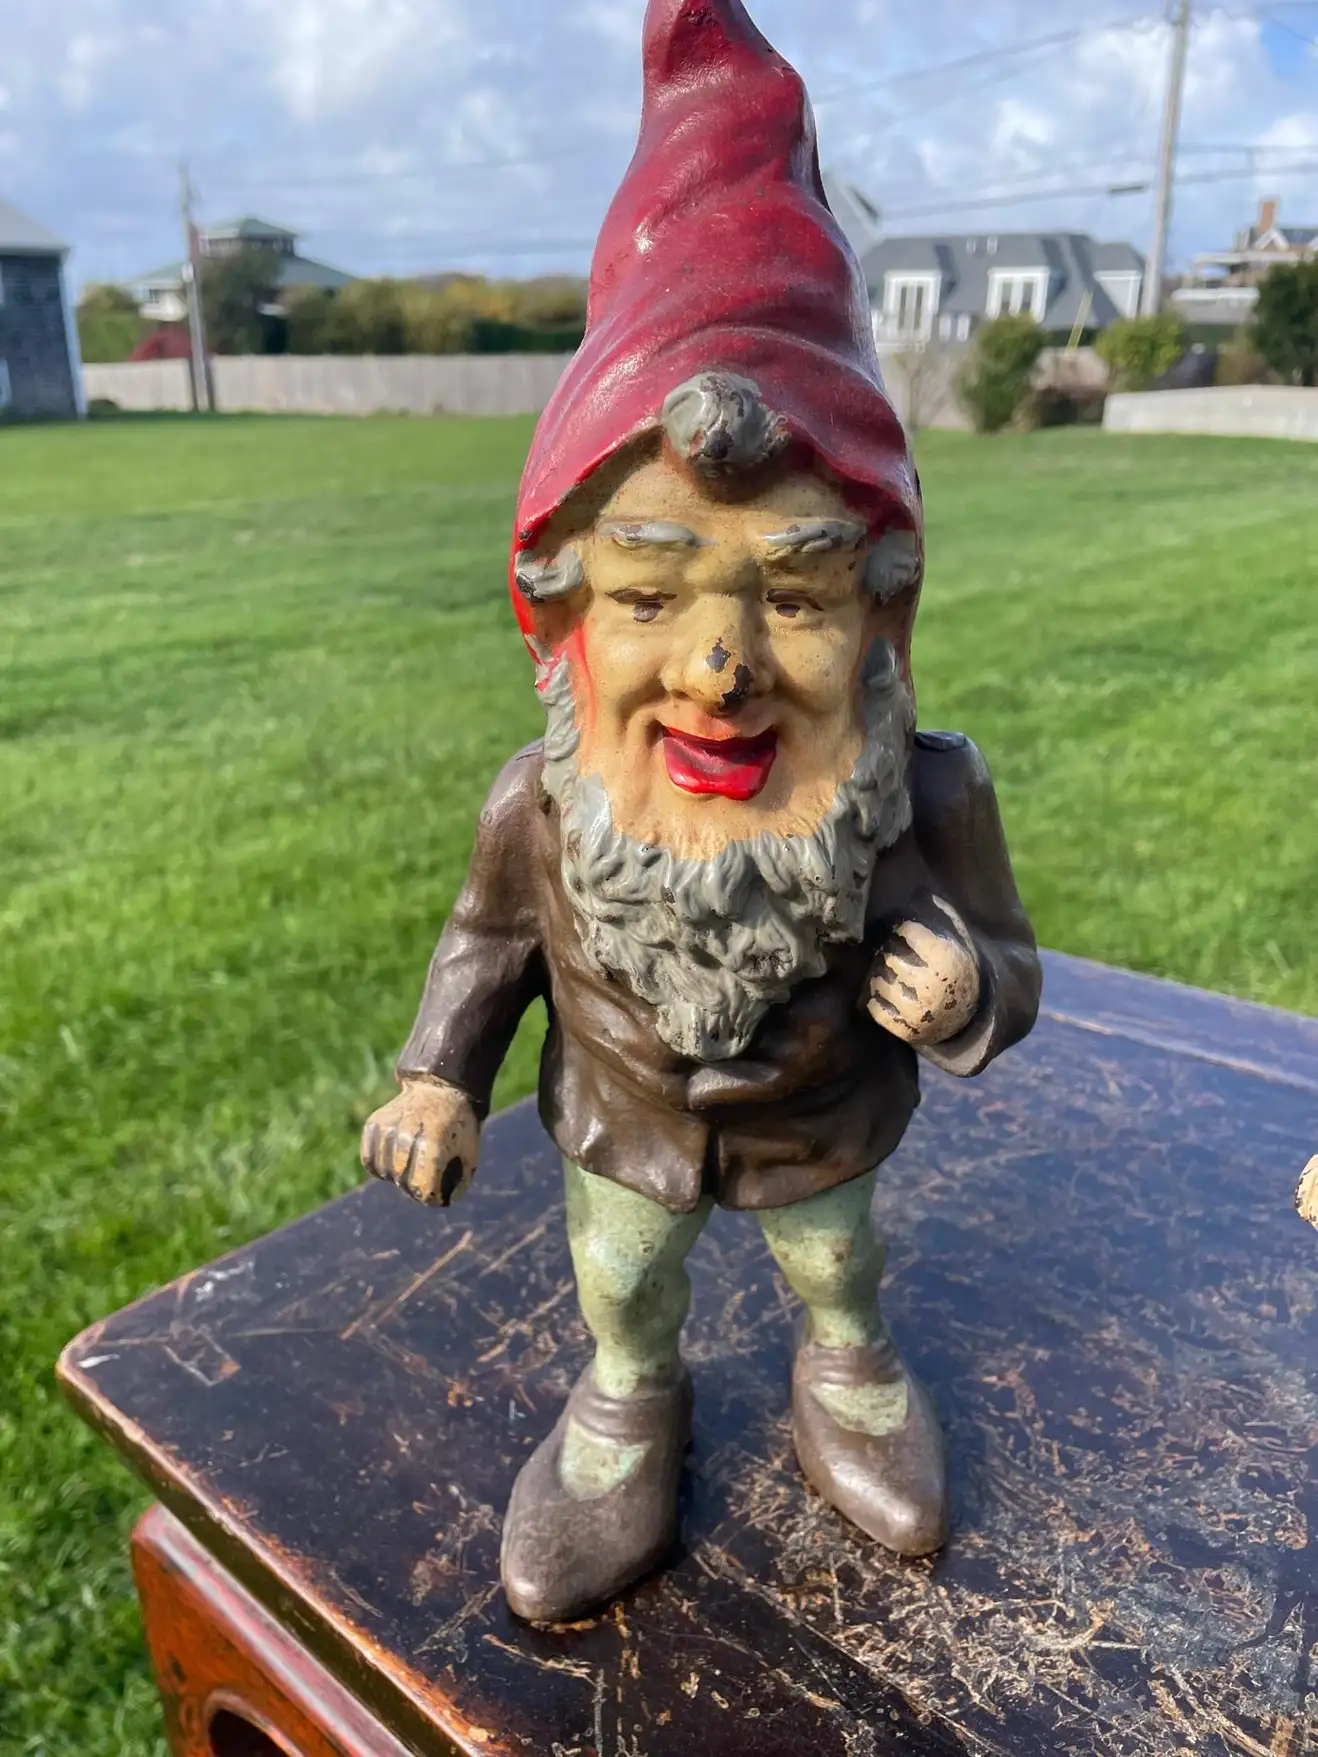 Amazon.com: Grovind Garden Gnomes Outdoor Decorations Solar Gnomes Garden  Statues, Garden Gnome Decor Holding Magic Orb with LED Lights, Gnomes  Outdoor Clearance for Garden Patio Lawn Decor Gnome Gift : Patio, Lawn